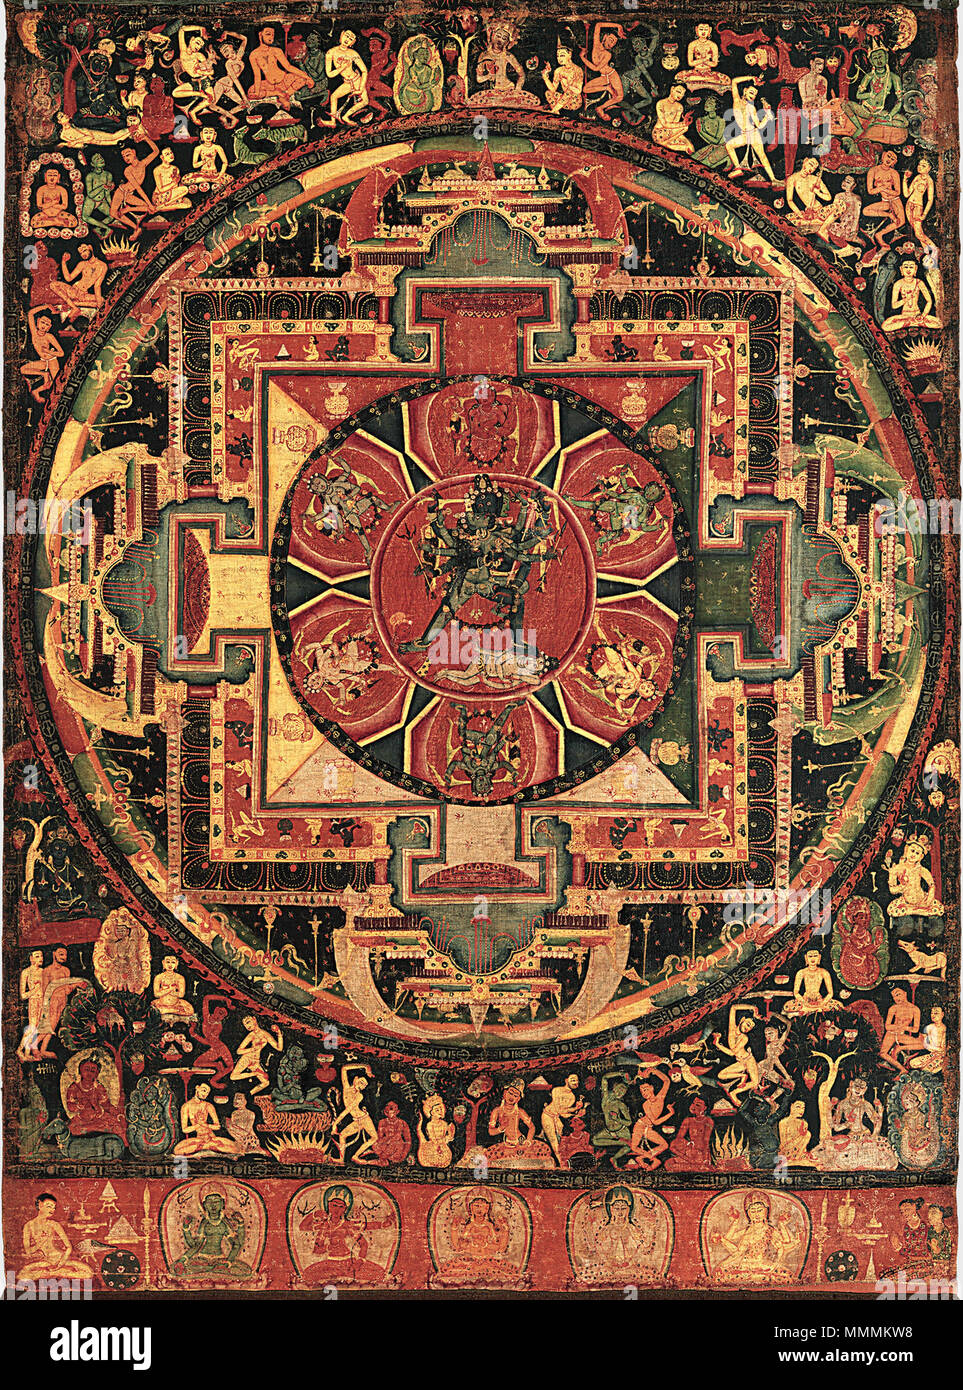 .  English: Chakrasamvara Mandala. Thakuri–Early Malla periods, Nepal, Kathmandu Valley. 26 1/2 x 19 3/4 in. (67.3 x 50.2 cm). This ritual diagram (mandala) is conceived as the cosmic palace of the wrathful Chakrasamvara and his consort, Vajravarahi, seen at center. These deities embody the esoteric knowledge of the Yoga Tantras. Six goddesses on stylized lotus petals surround the divine couple. Framing the mandala are the eight great burial grounds of India, each presided over by a deity beneath a tree. The cemeteries are appropriate places for meditation on Chakrasamvara and are emblematic o Stock Photo